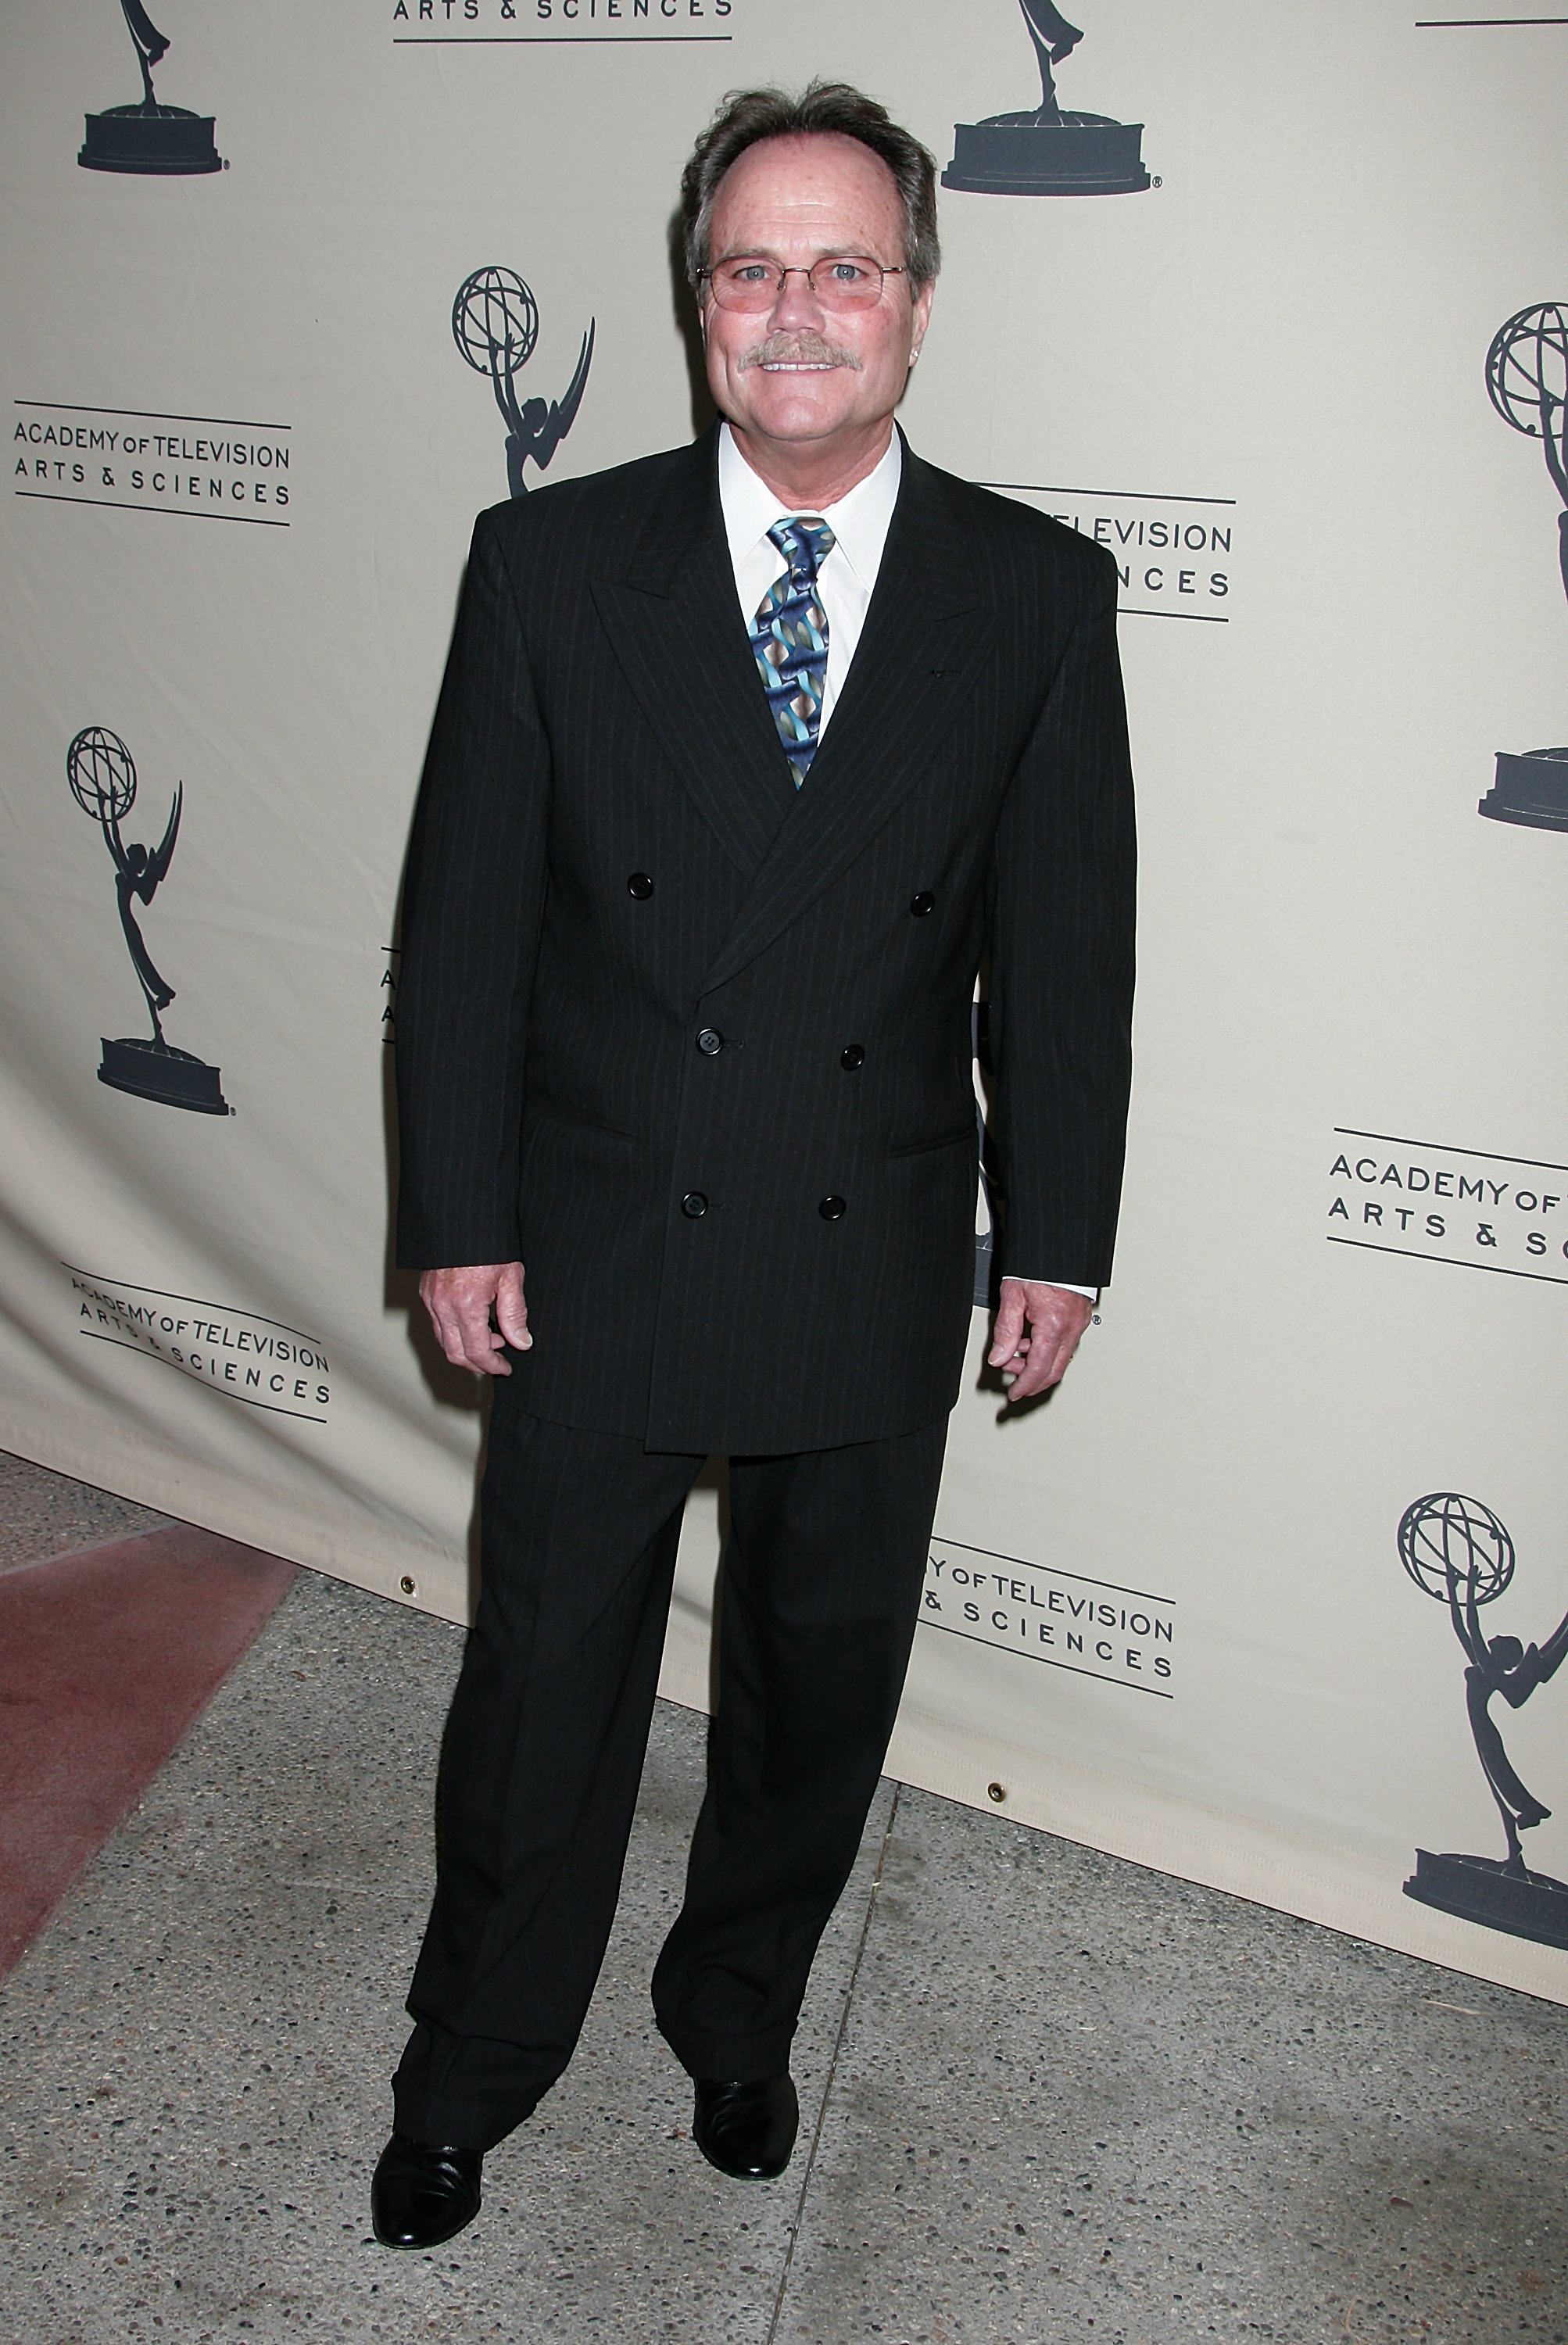 Actor Jon Provost attends 'A Mother's Day Salute to TV Moms' at the Academy of Television Arts & Sciences on May 6, 2008 | Source: Getty Images